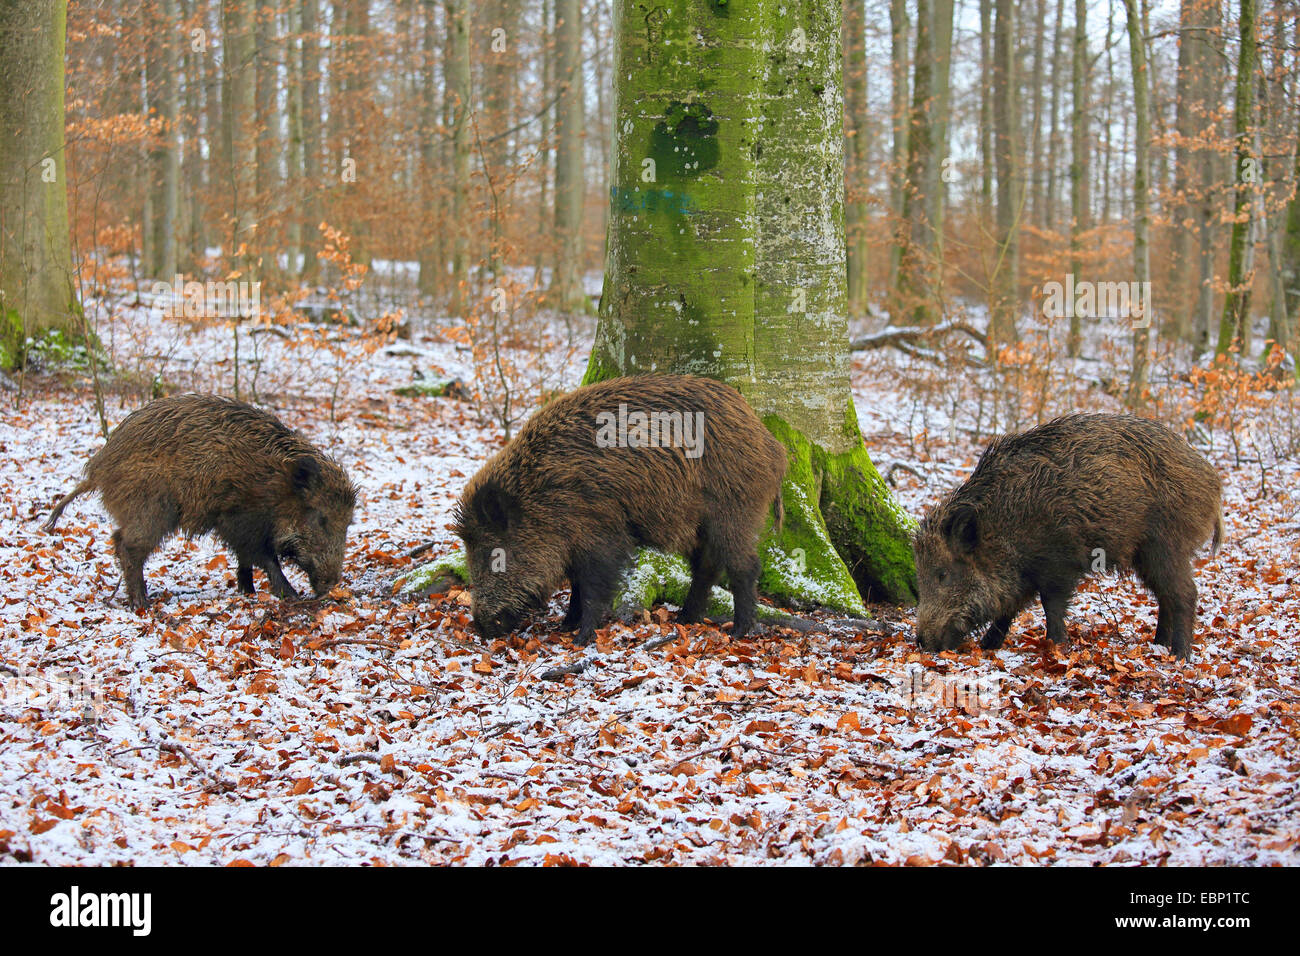 wild boar, pig, wild boar (Sus scrofa), three wild sows searching food in a winter forest, Germany, Baden-Wuerttemberg Stock Photo